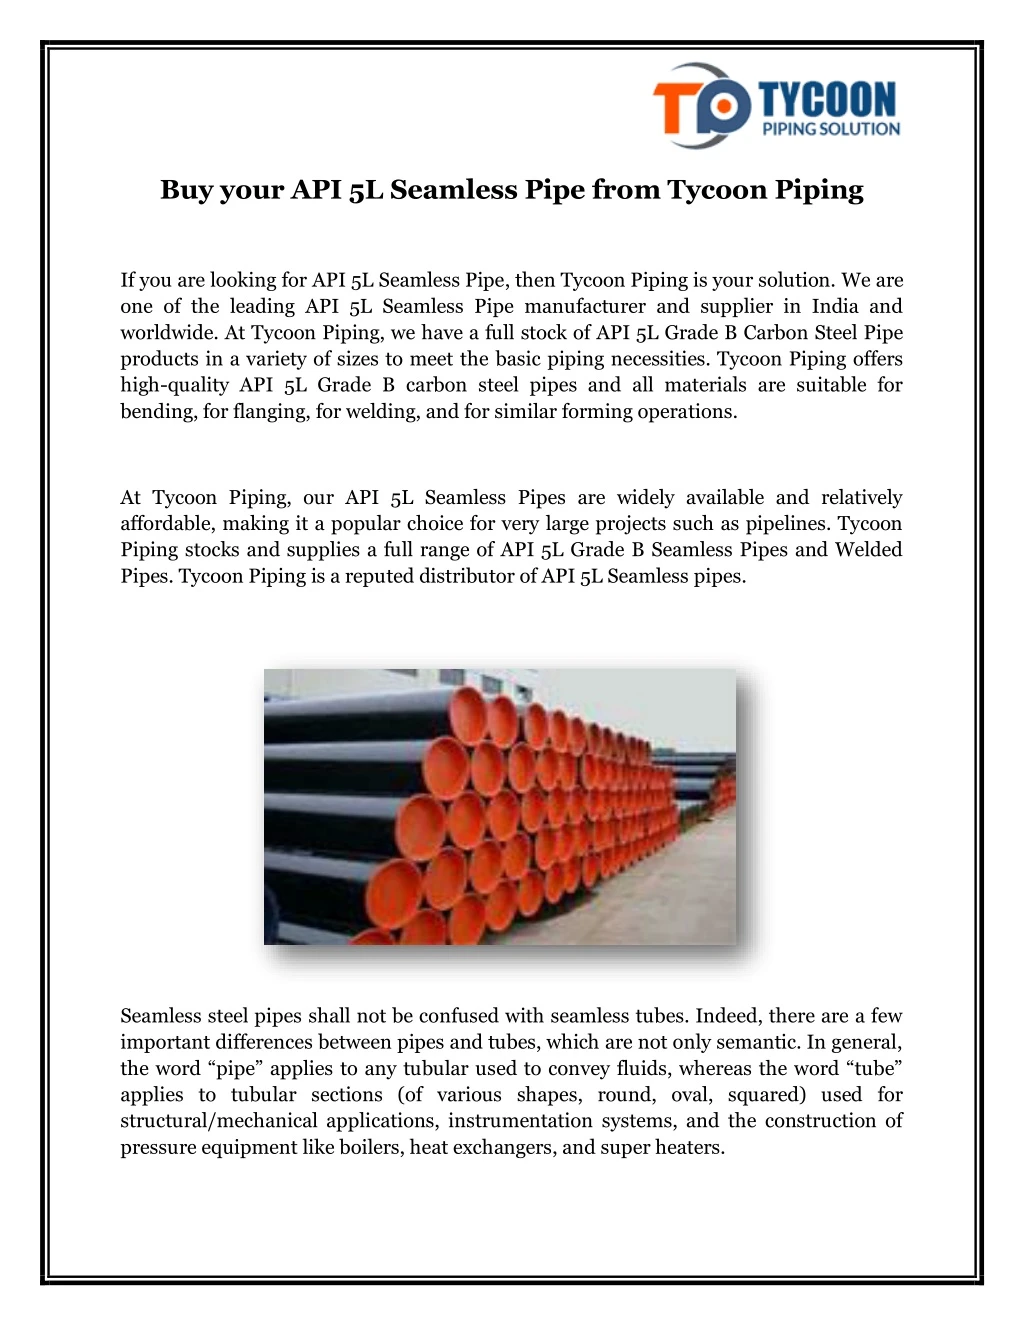 buy your api 5l seamless pipe from tycoon piping